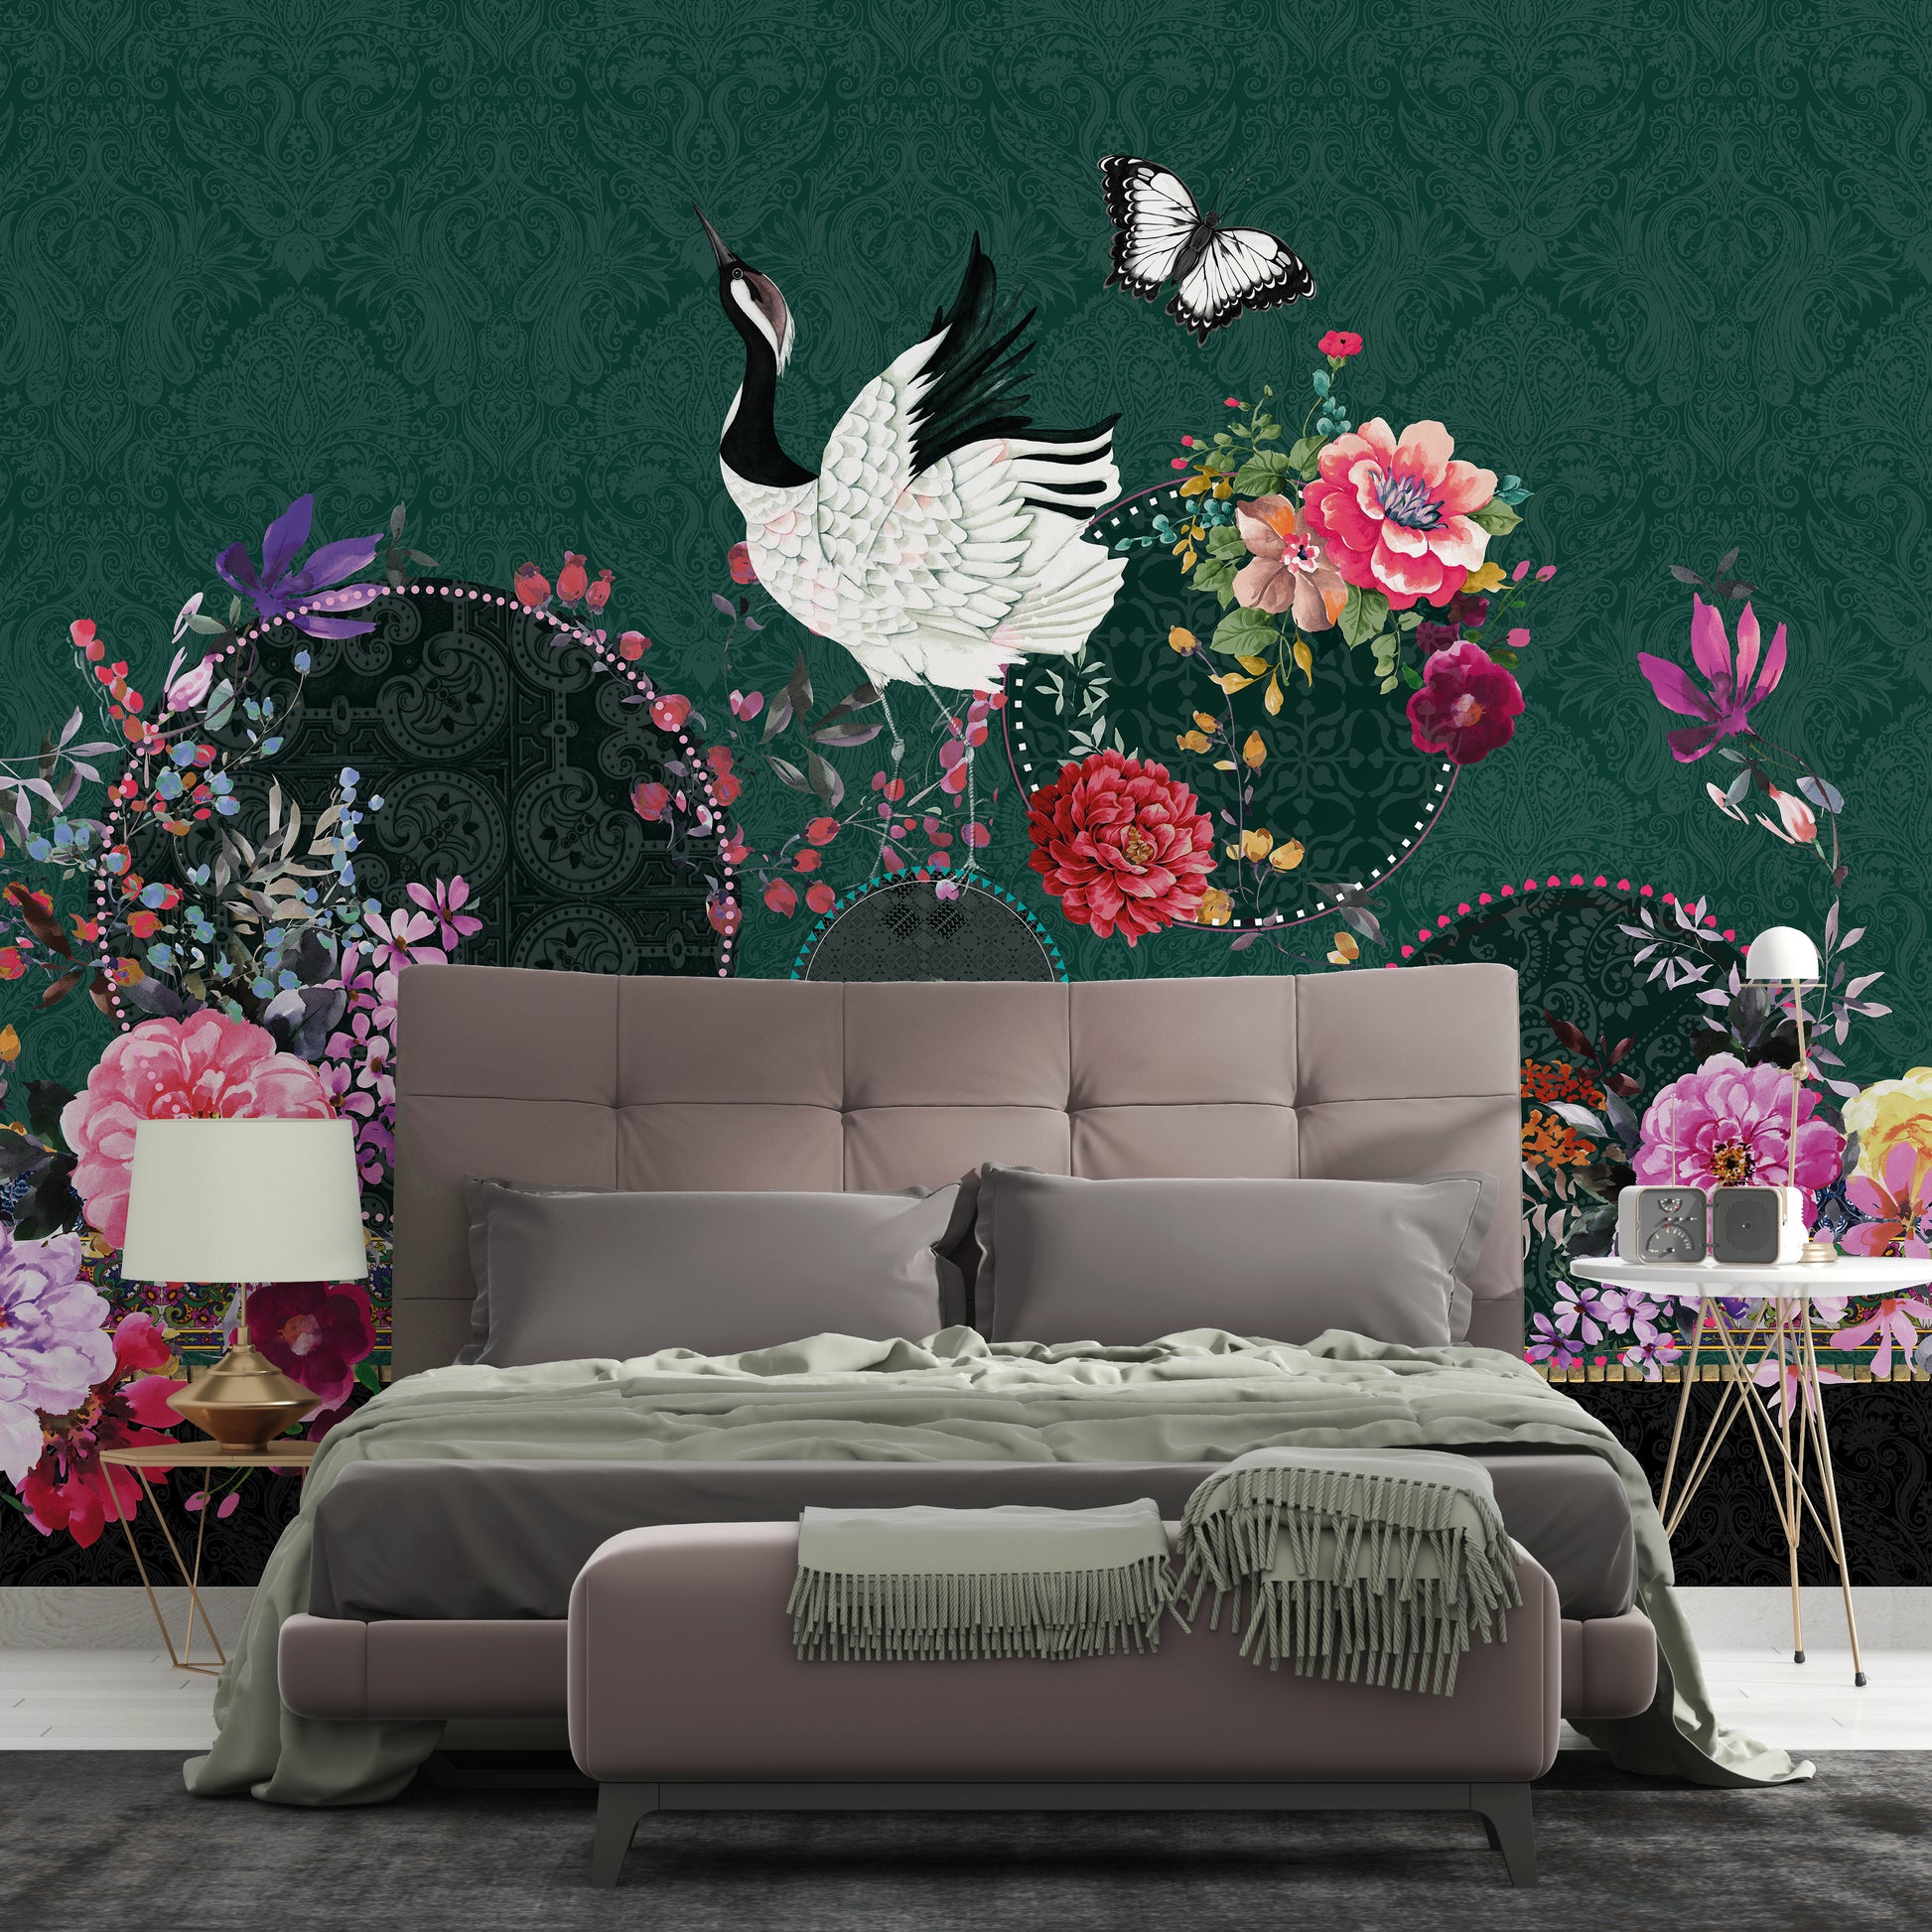 Melli Mello Craney in paradise Wallpaper crane floral colorful green deco eyecatcher be different bed room deco 